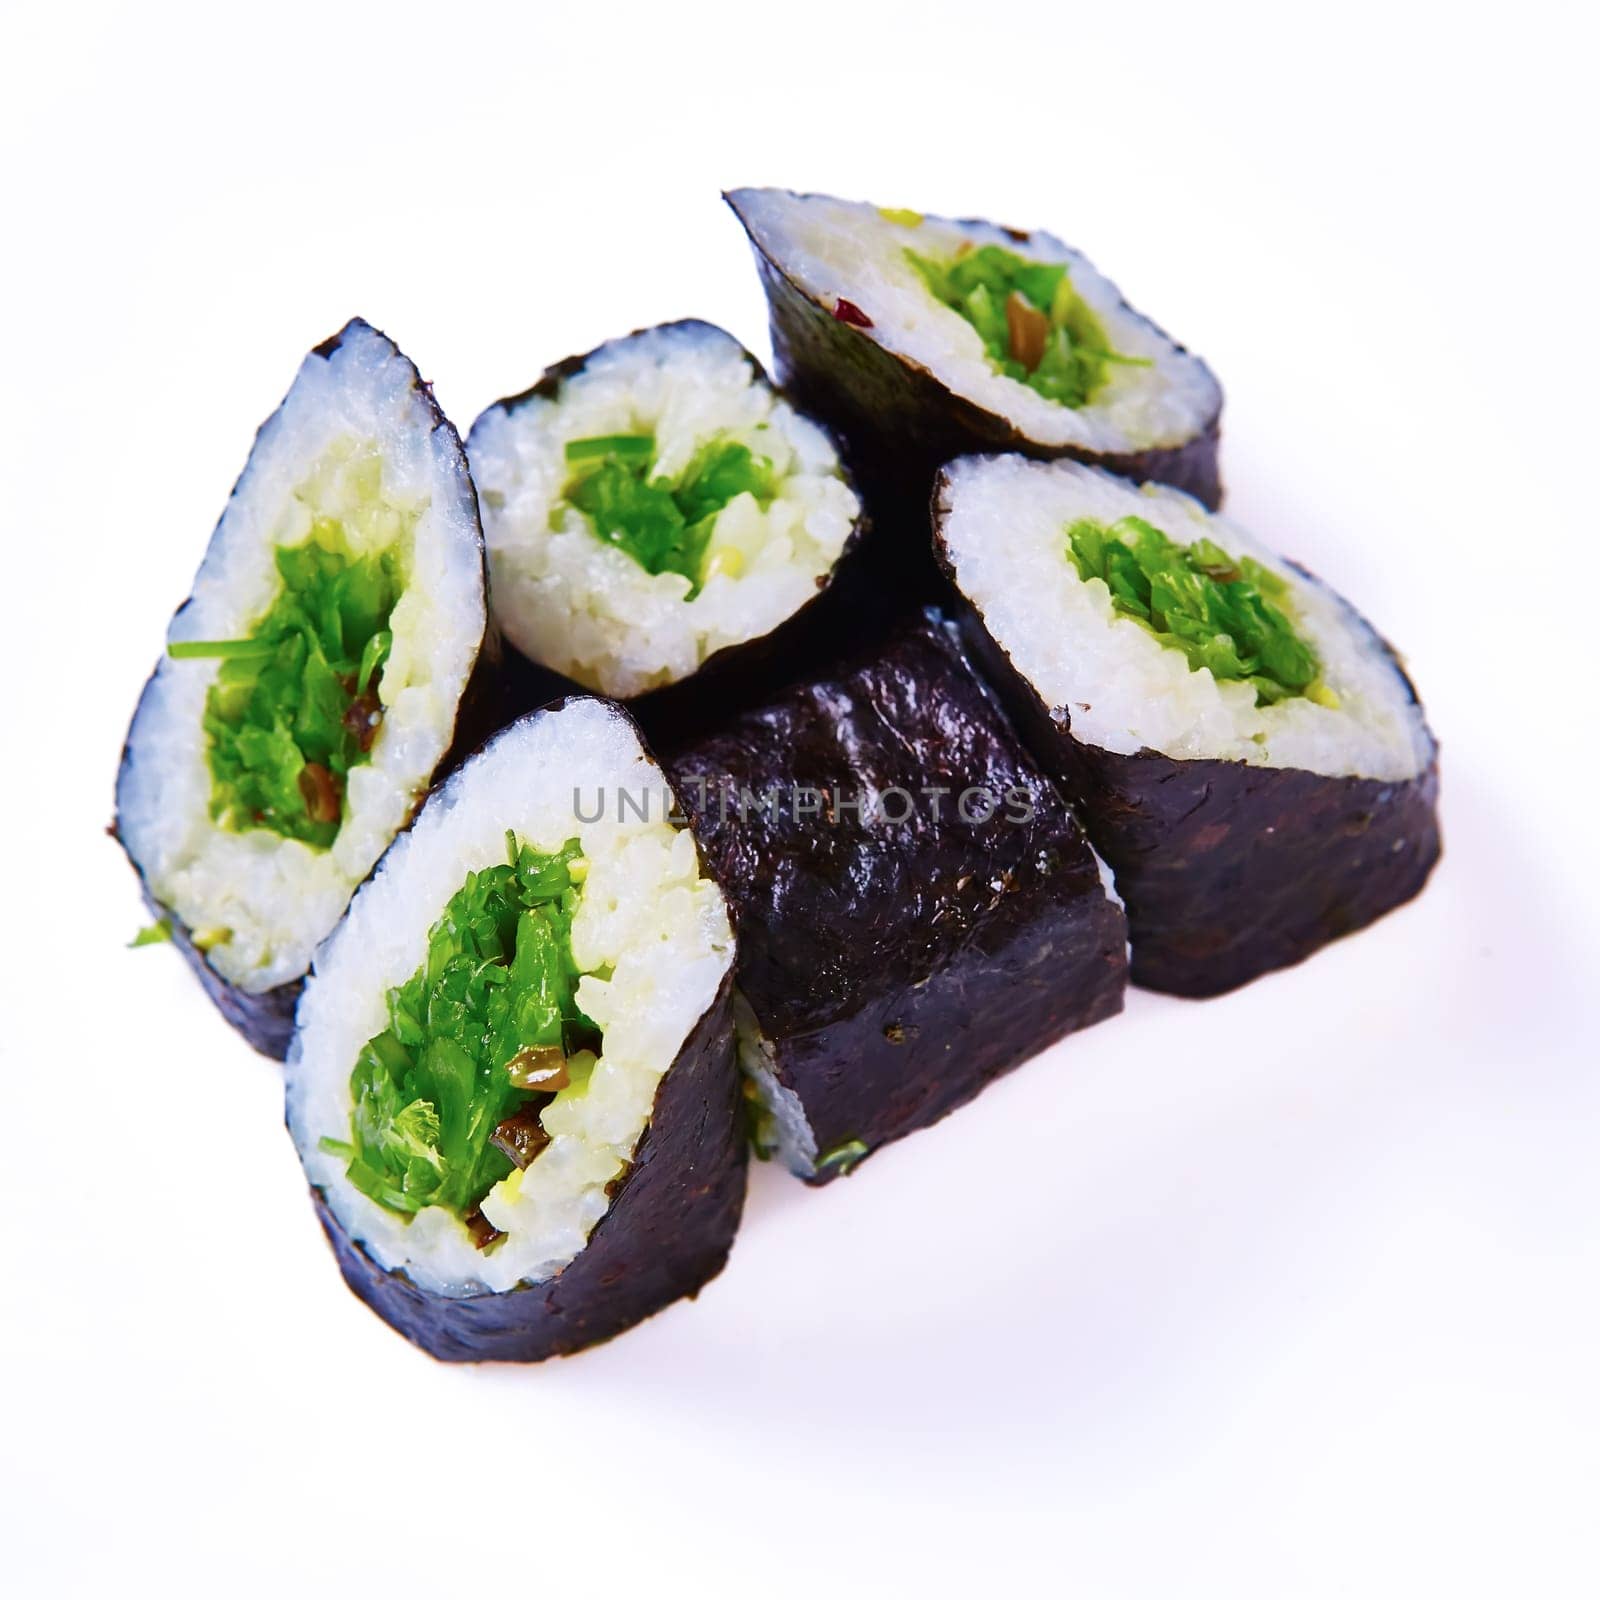 Sushi rolls with hiashi seaweed. Vegetarian maki rolls. Low calorie meal. Japanese food. Asian cuisine. White background. Close-up. Soft focus. by sarymsakov